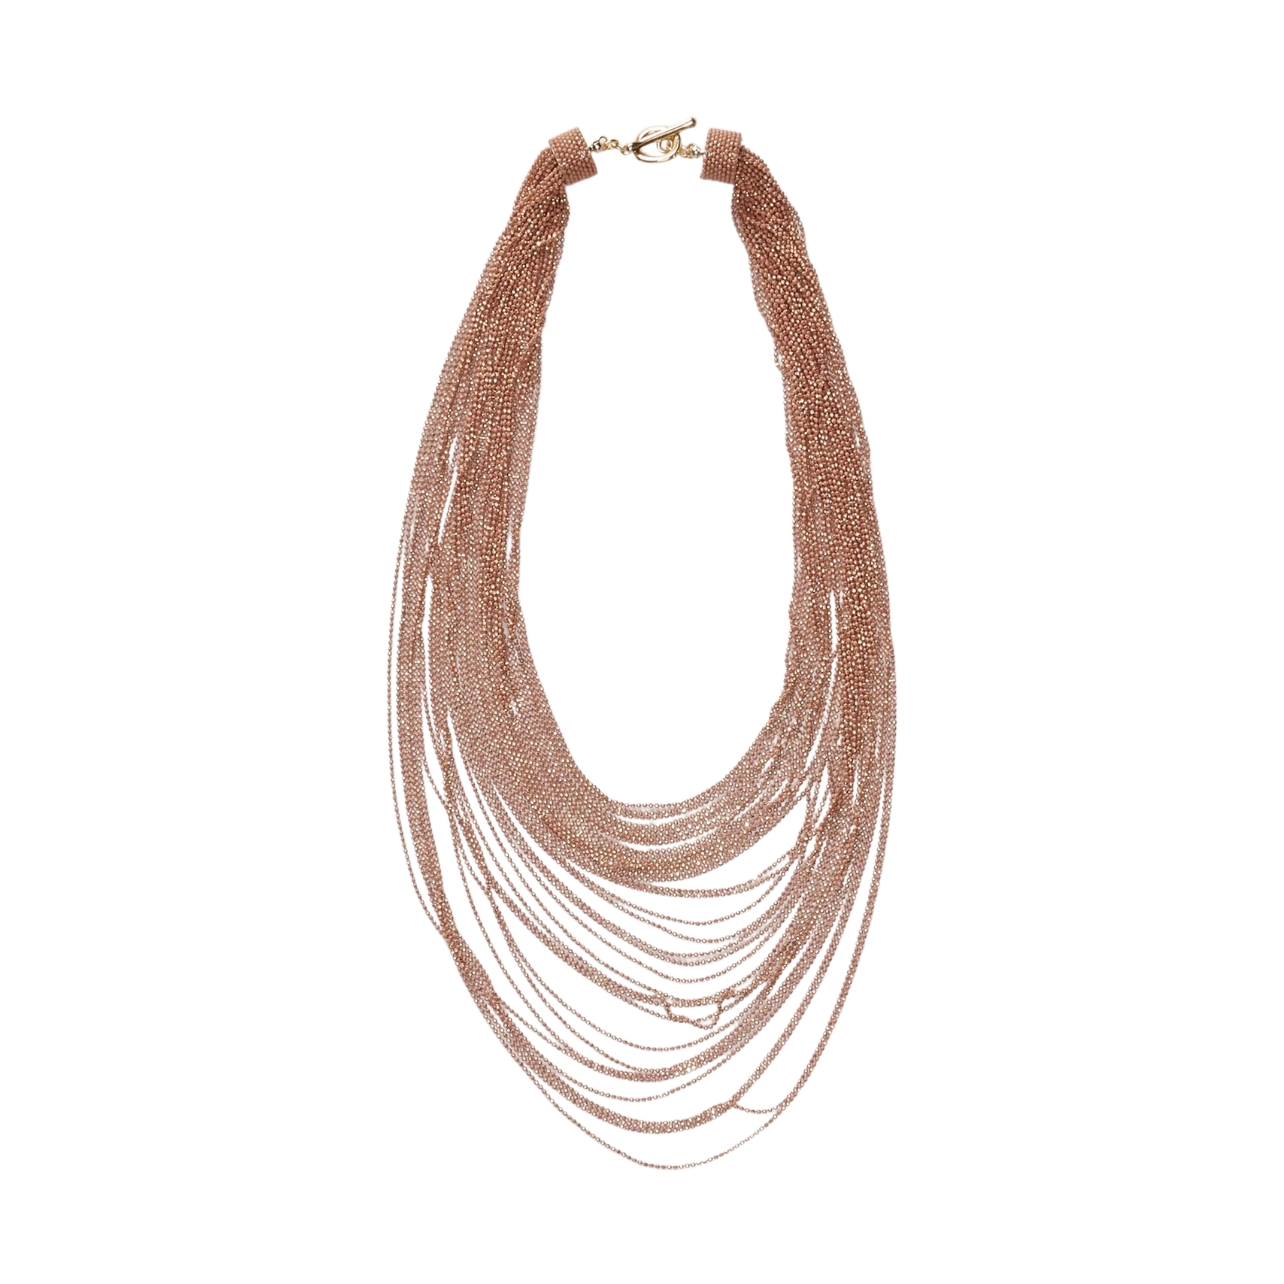 An extra roll-up bag just for jewelry? Not necessary. All you need is Fabiana Filippi’s multi-layered, sparkling-thread necklace to add sparkle to everything from the jeans and white shirt you wore on the plane to the cocktail dress you’re wearing for the closing party.